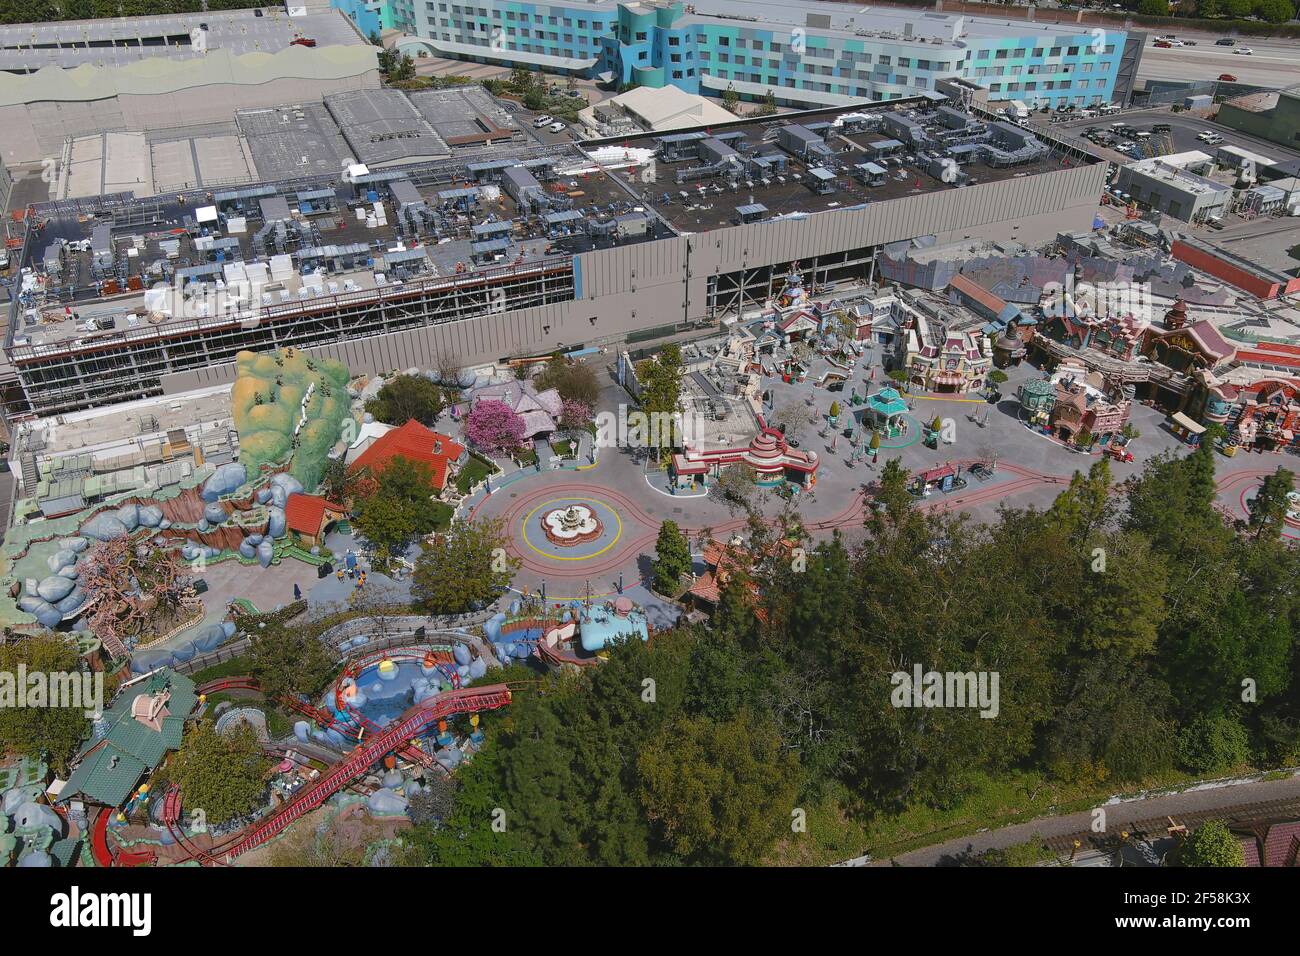 An aerial view of Mickey's Toontown at Disneyland Park, Wednesday, March 24, 2021, in Anaheim, Calif. Stock Photo